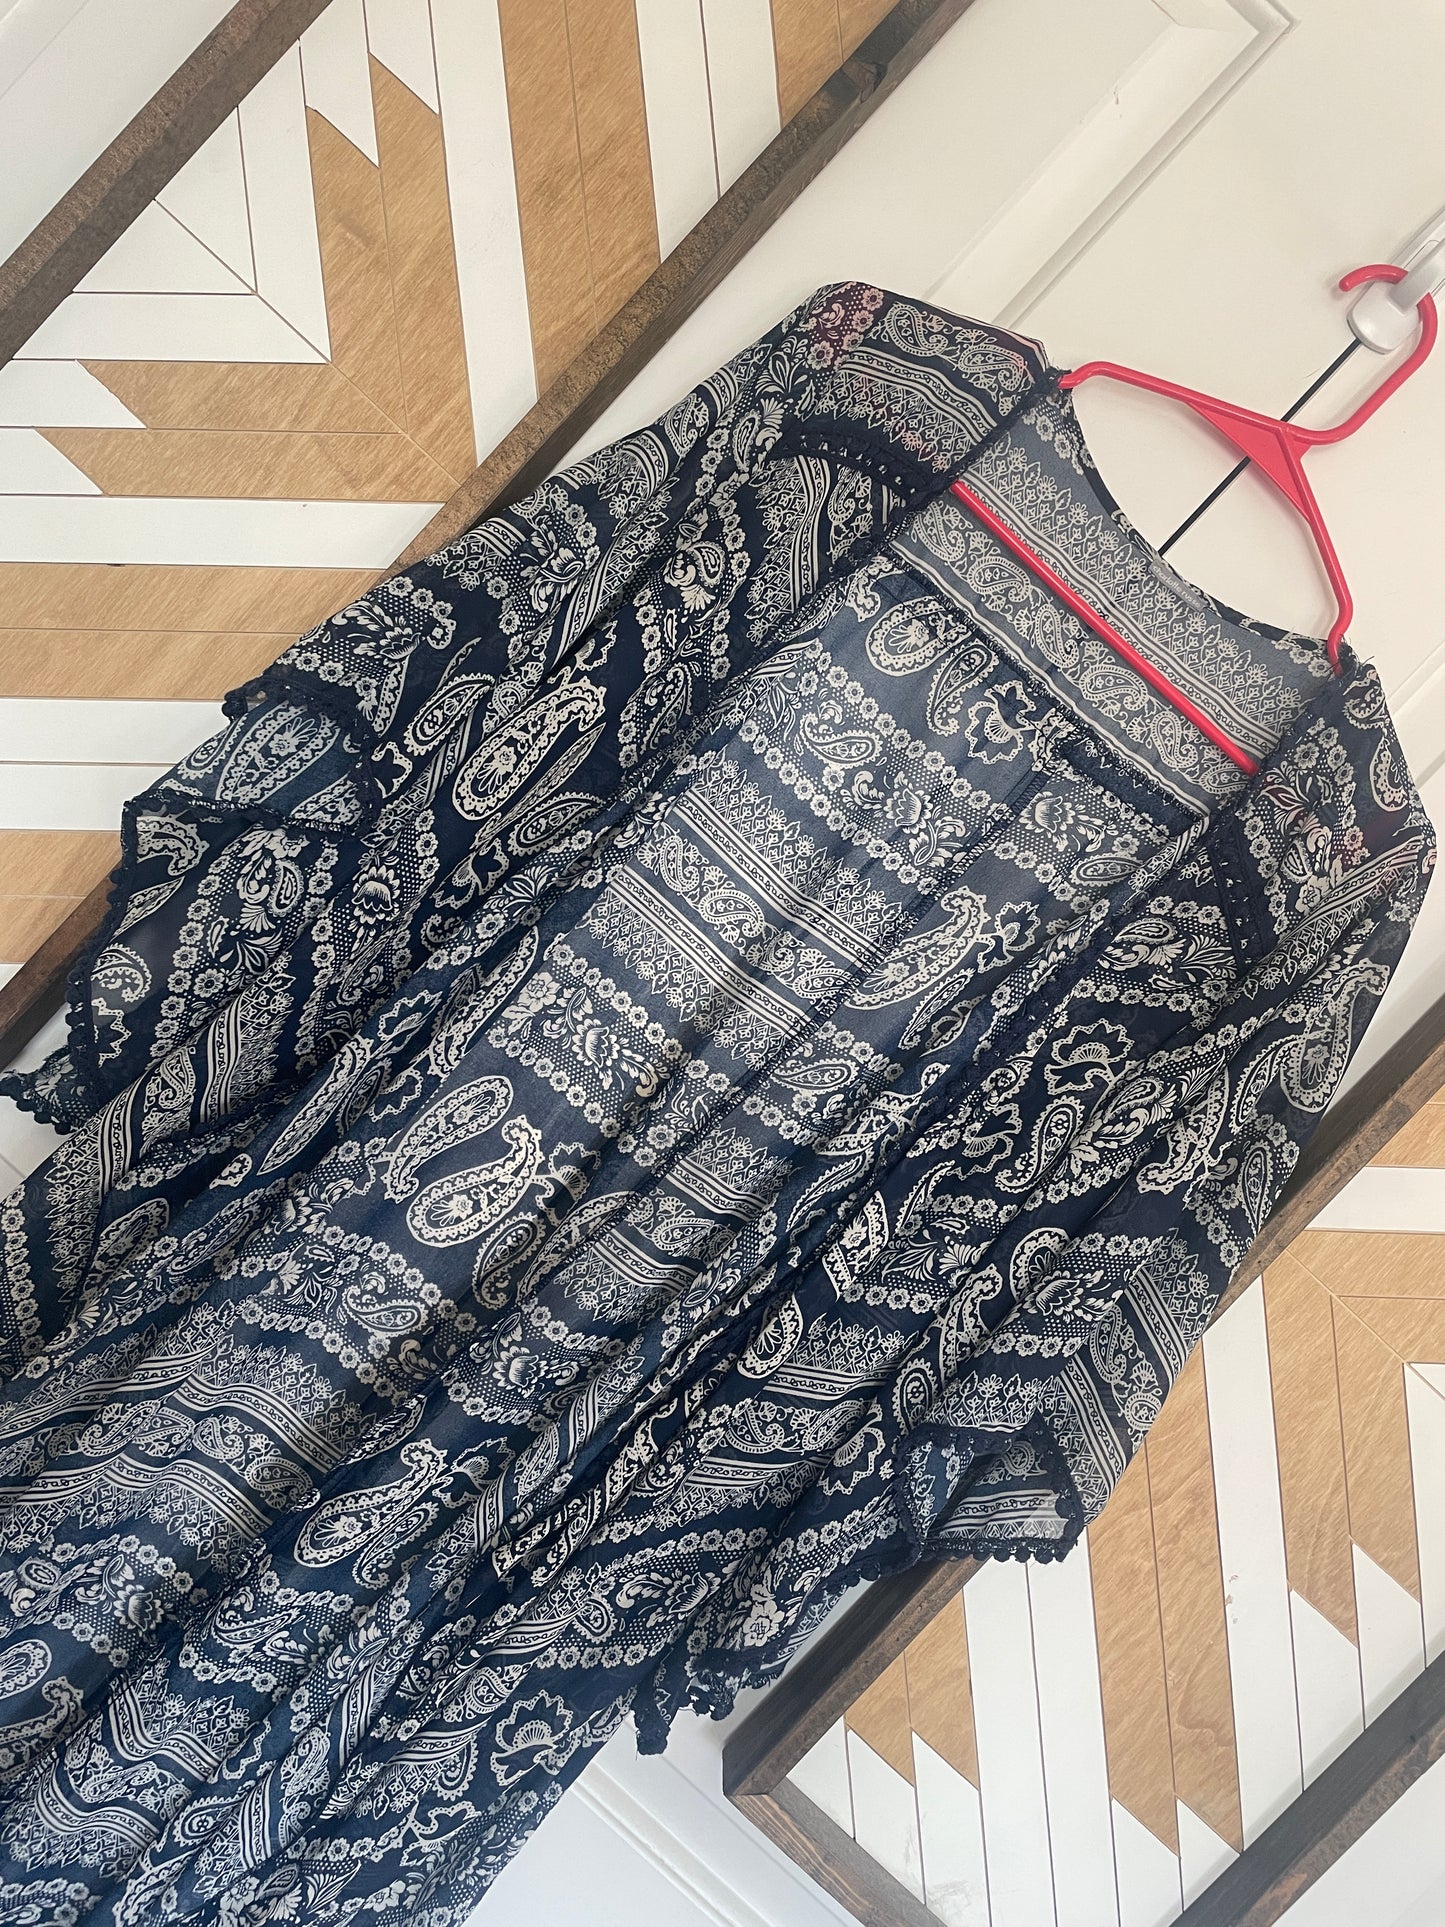 Women’s Small Charlotte Russe Navy Blue and White Paisley Sheer Kimono Duster